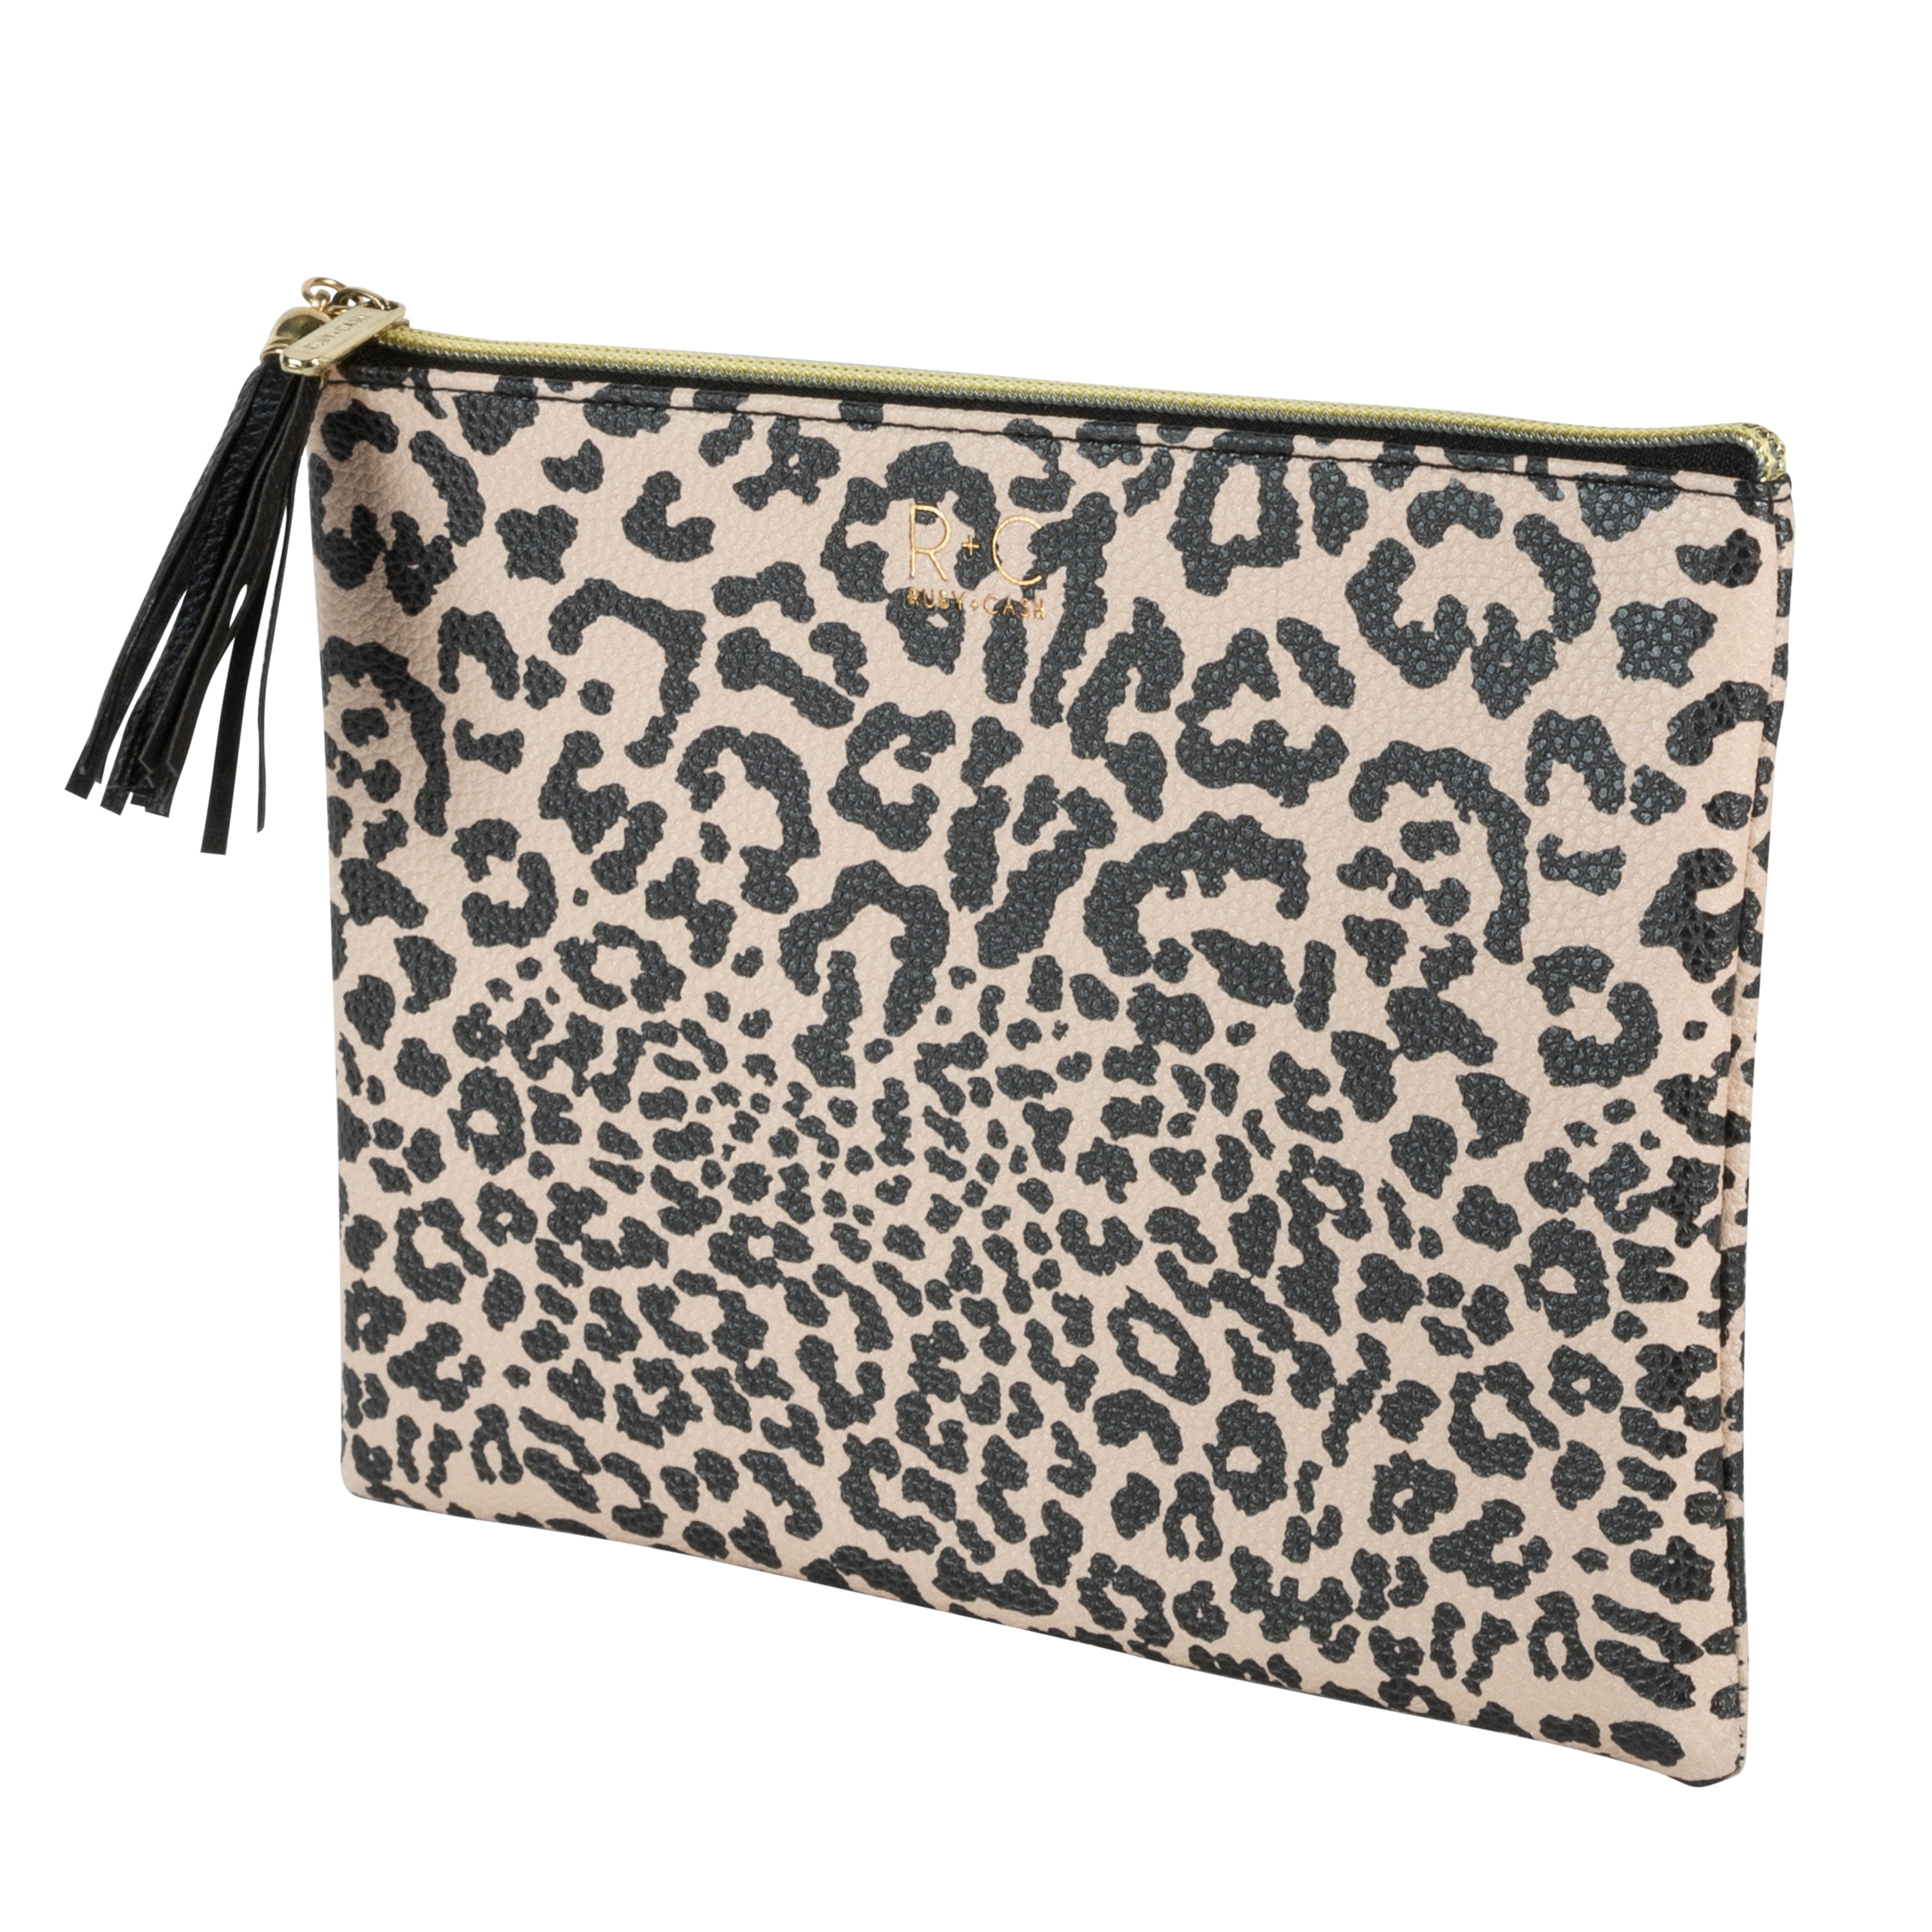 Ruby+Cash Makeup Bag Cosmetic Pouch with Tassel, Leopard Print, Nude -  Walmart.com